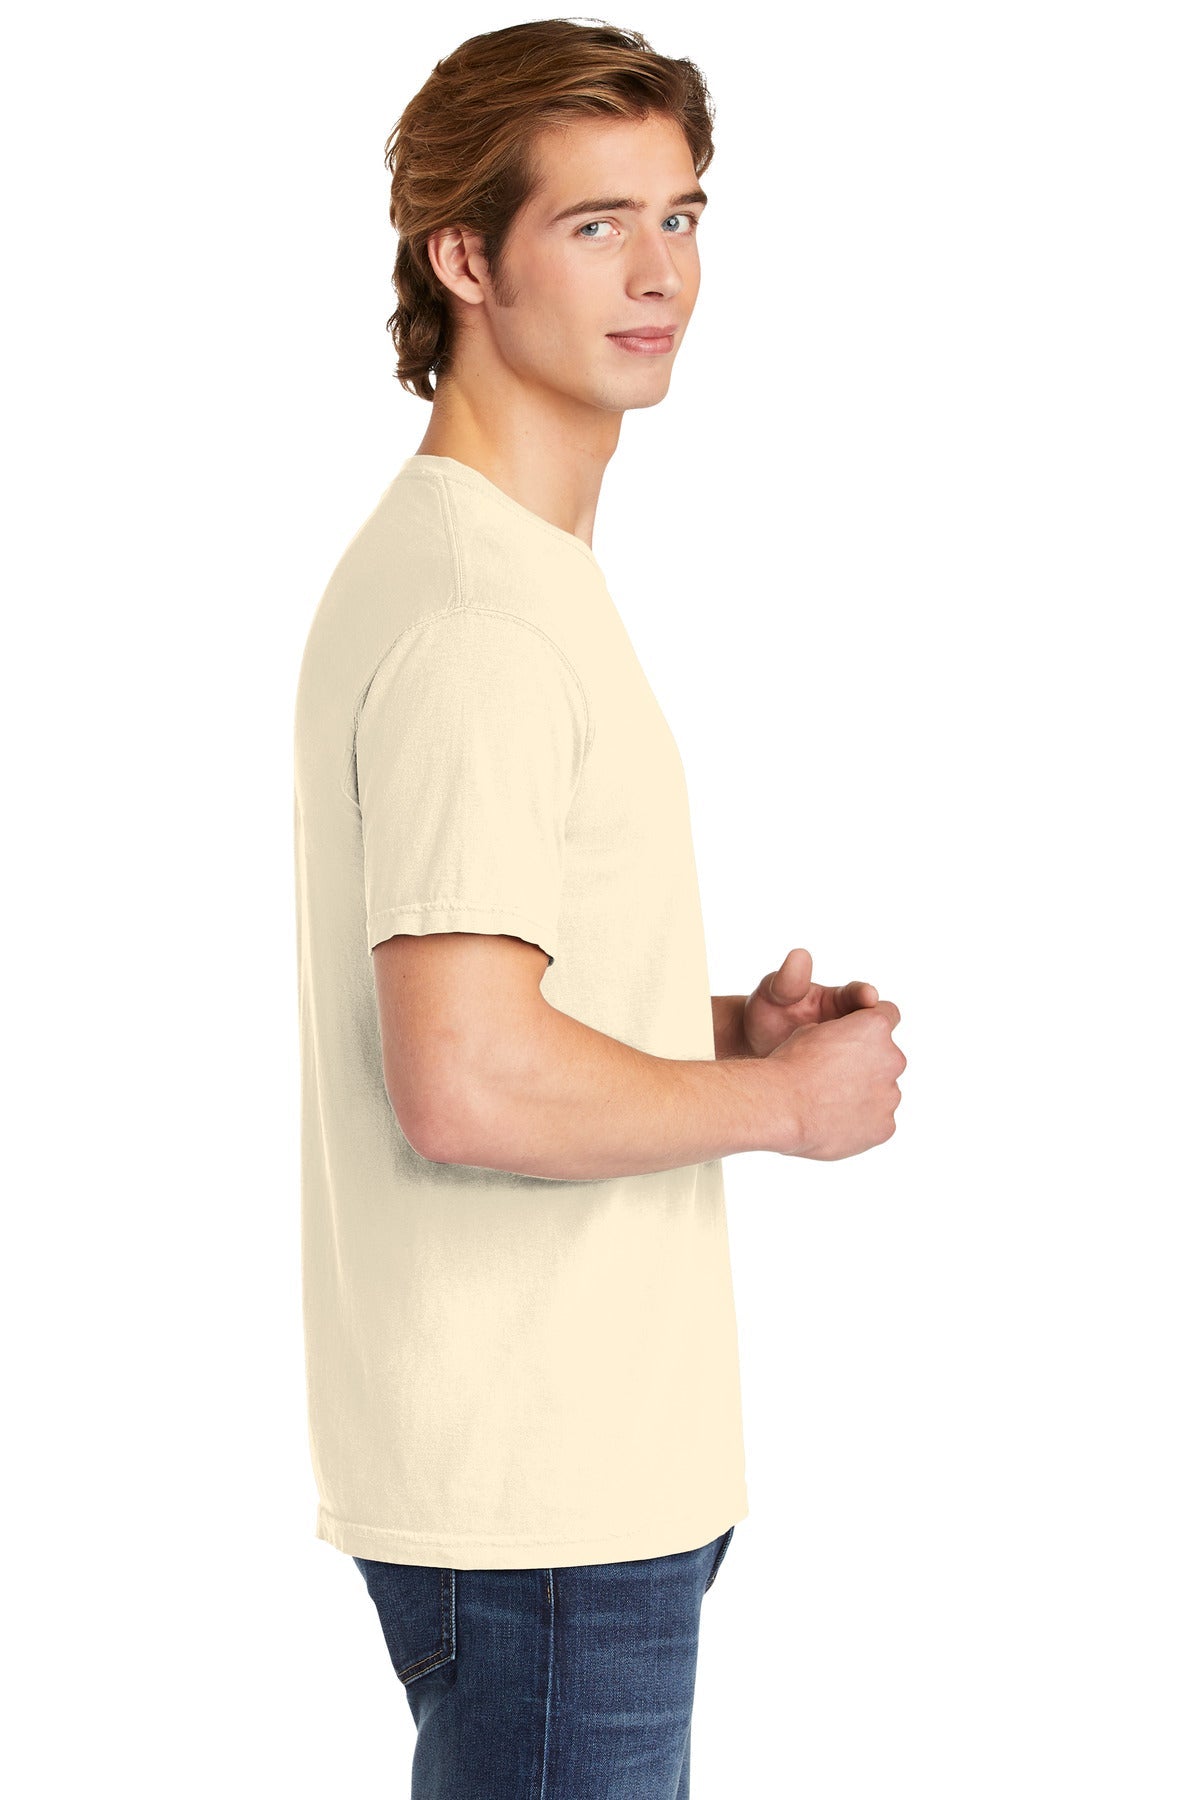 COMFORT COLORS ® Heavyweight Ring Spun Tee. 1717 [Ivory] - DFW Impression